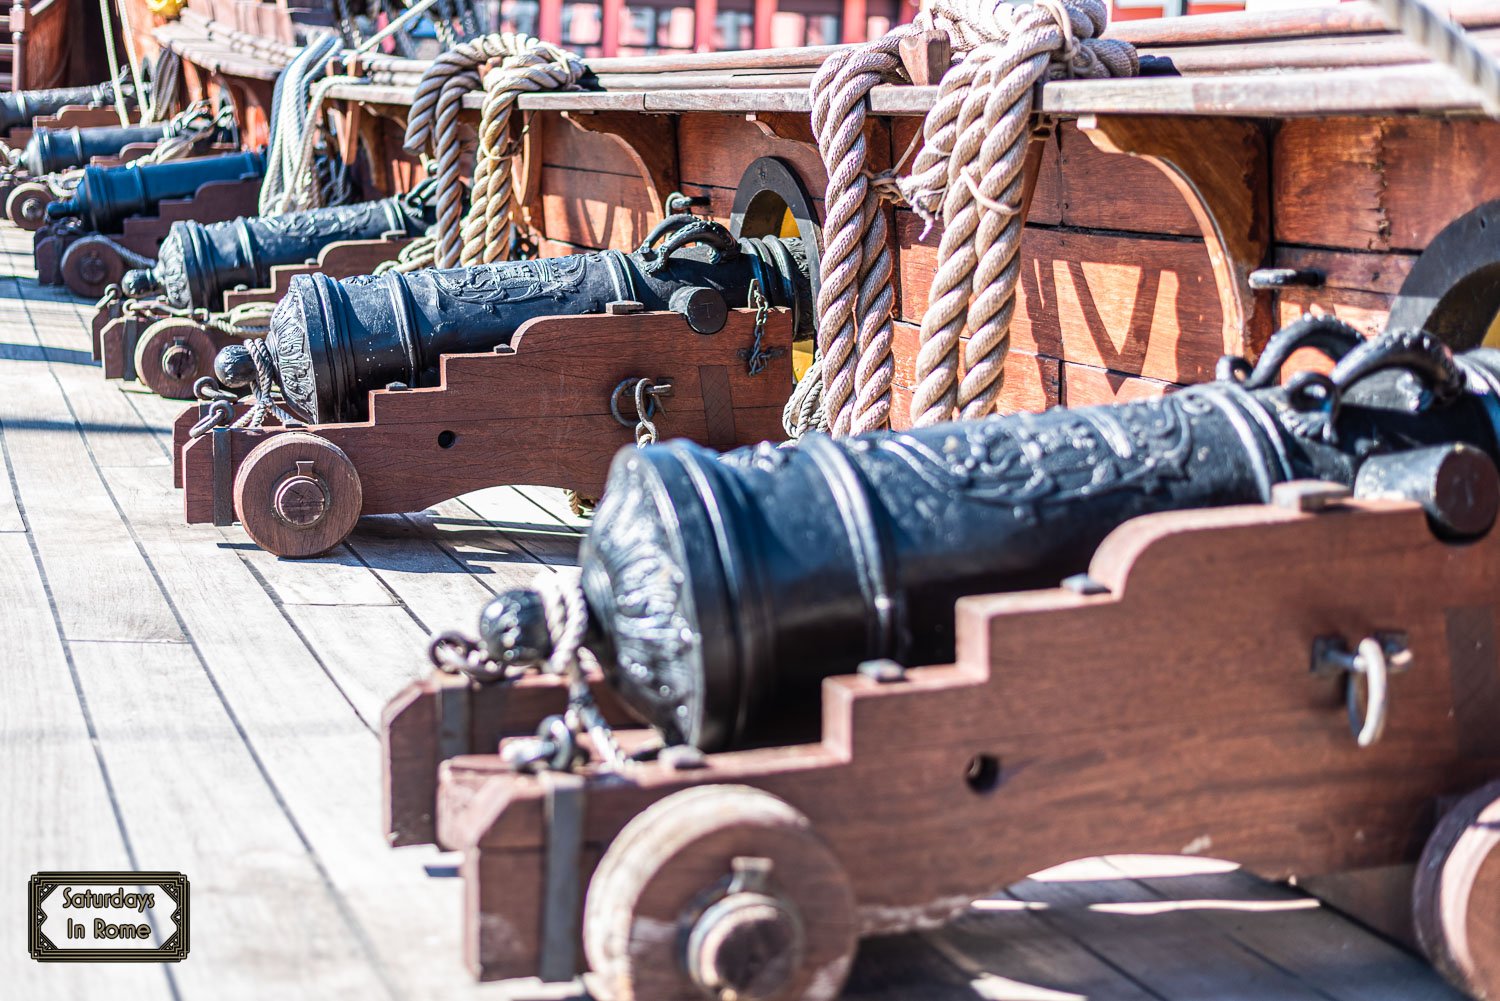 Things To See In Genoa - Cannons On The Neptune